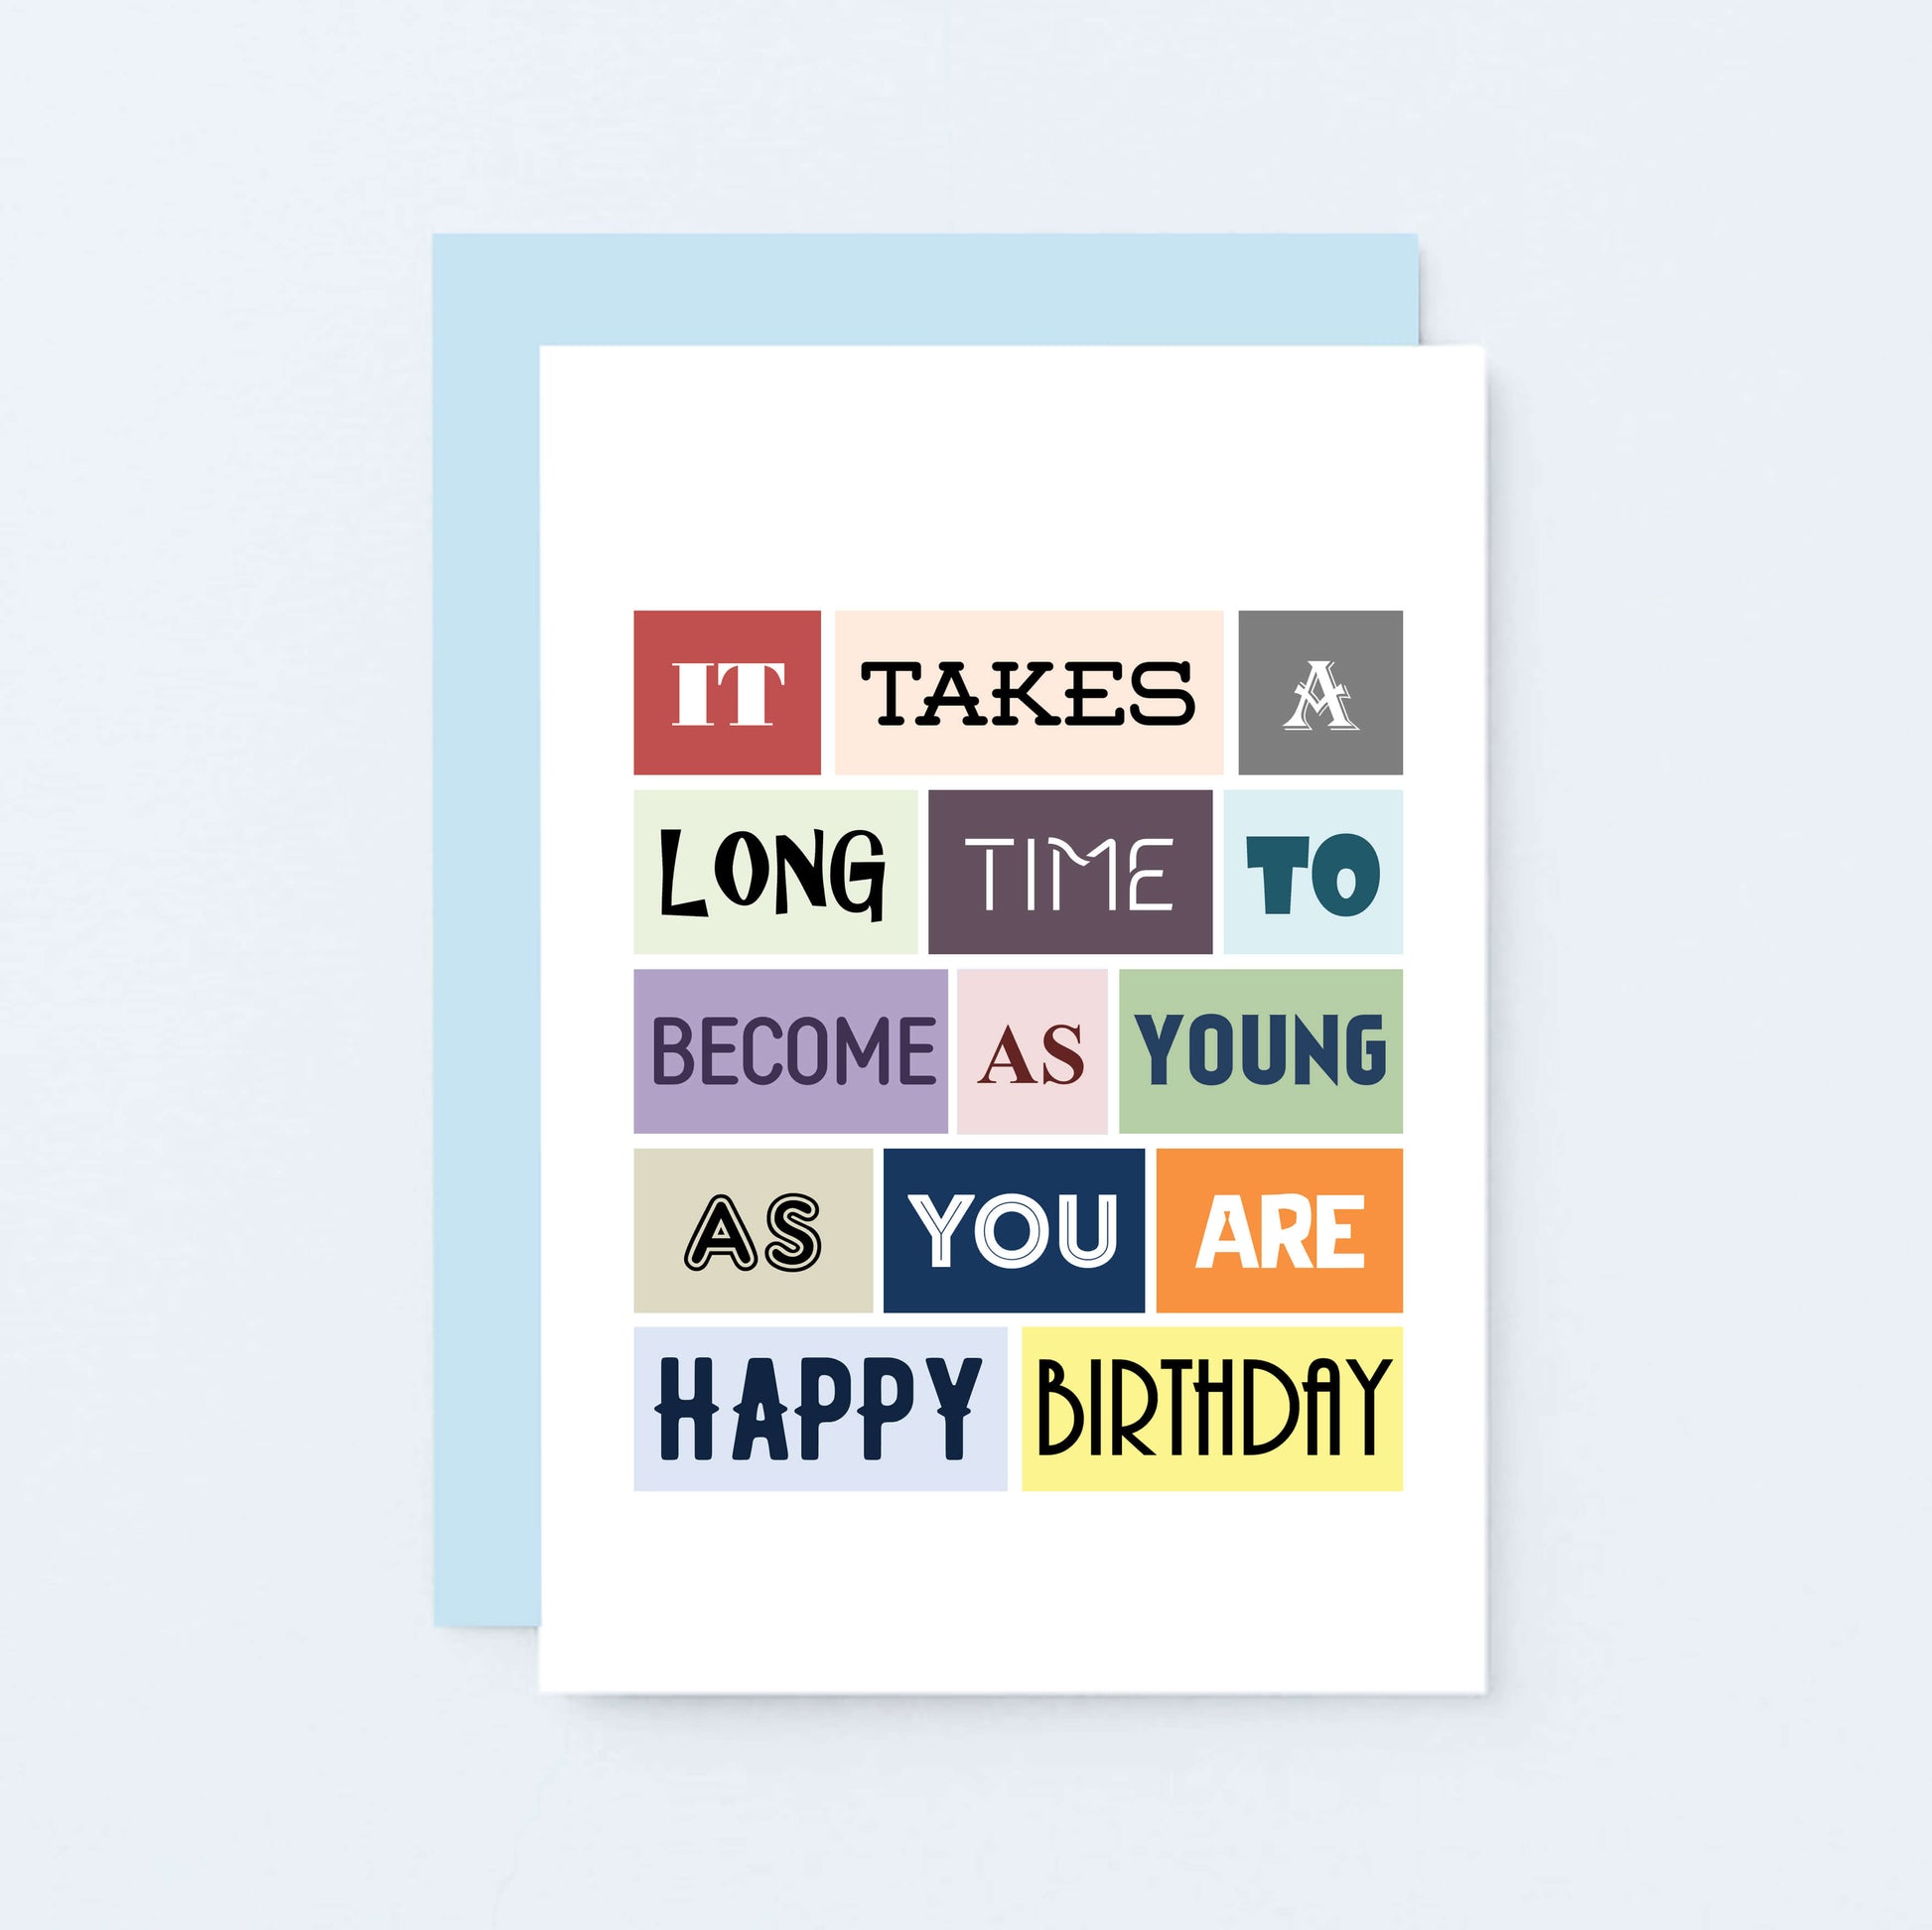 Sarcastic Birthday Card by SixElevenCreations. Reads It takes a long time to become as young as you are. Happy birthday. Product Code SE0027A6